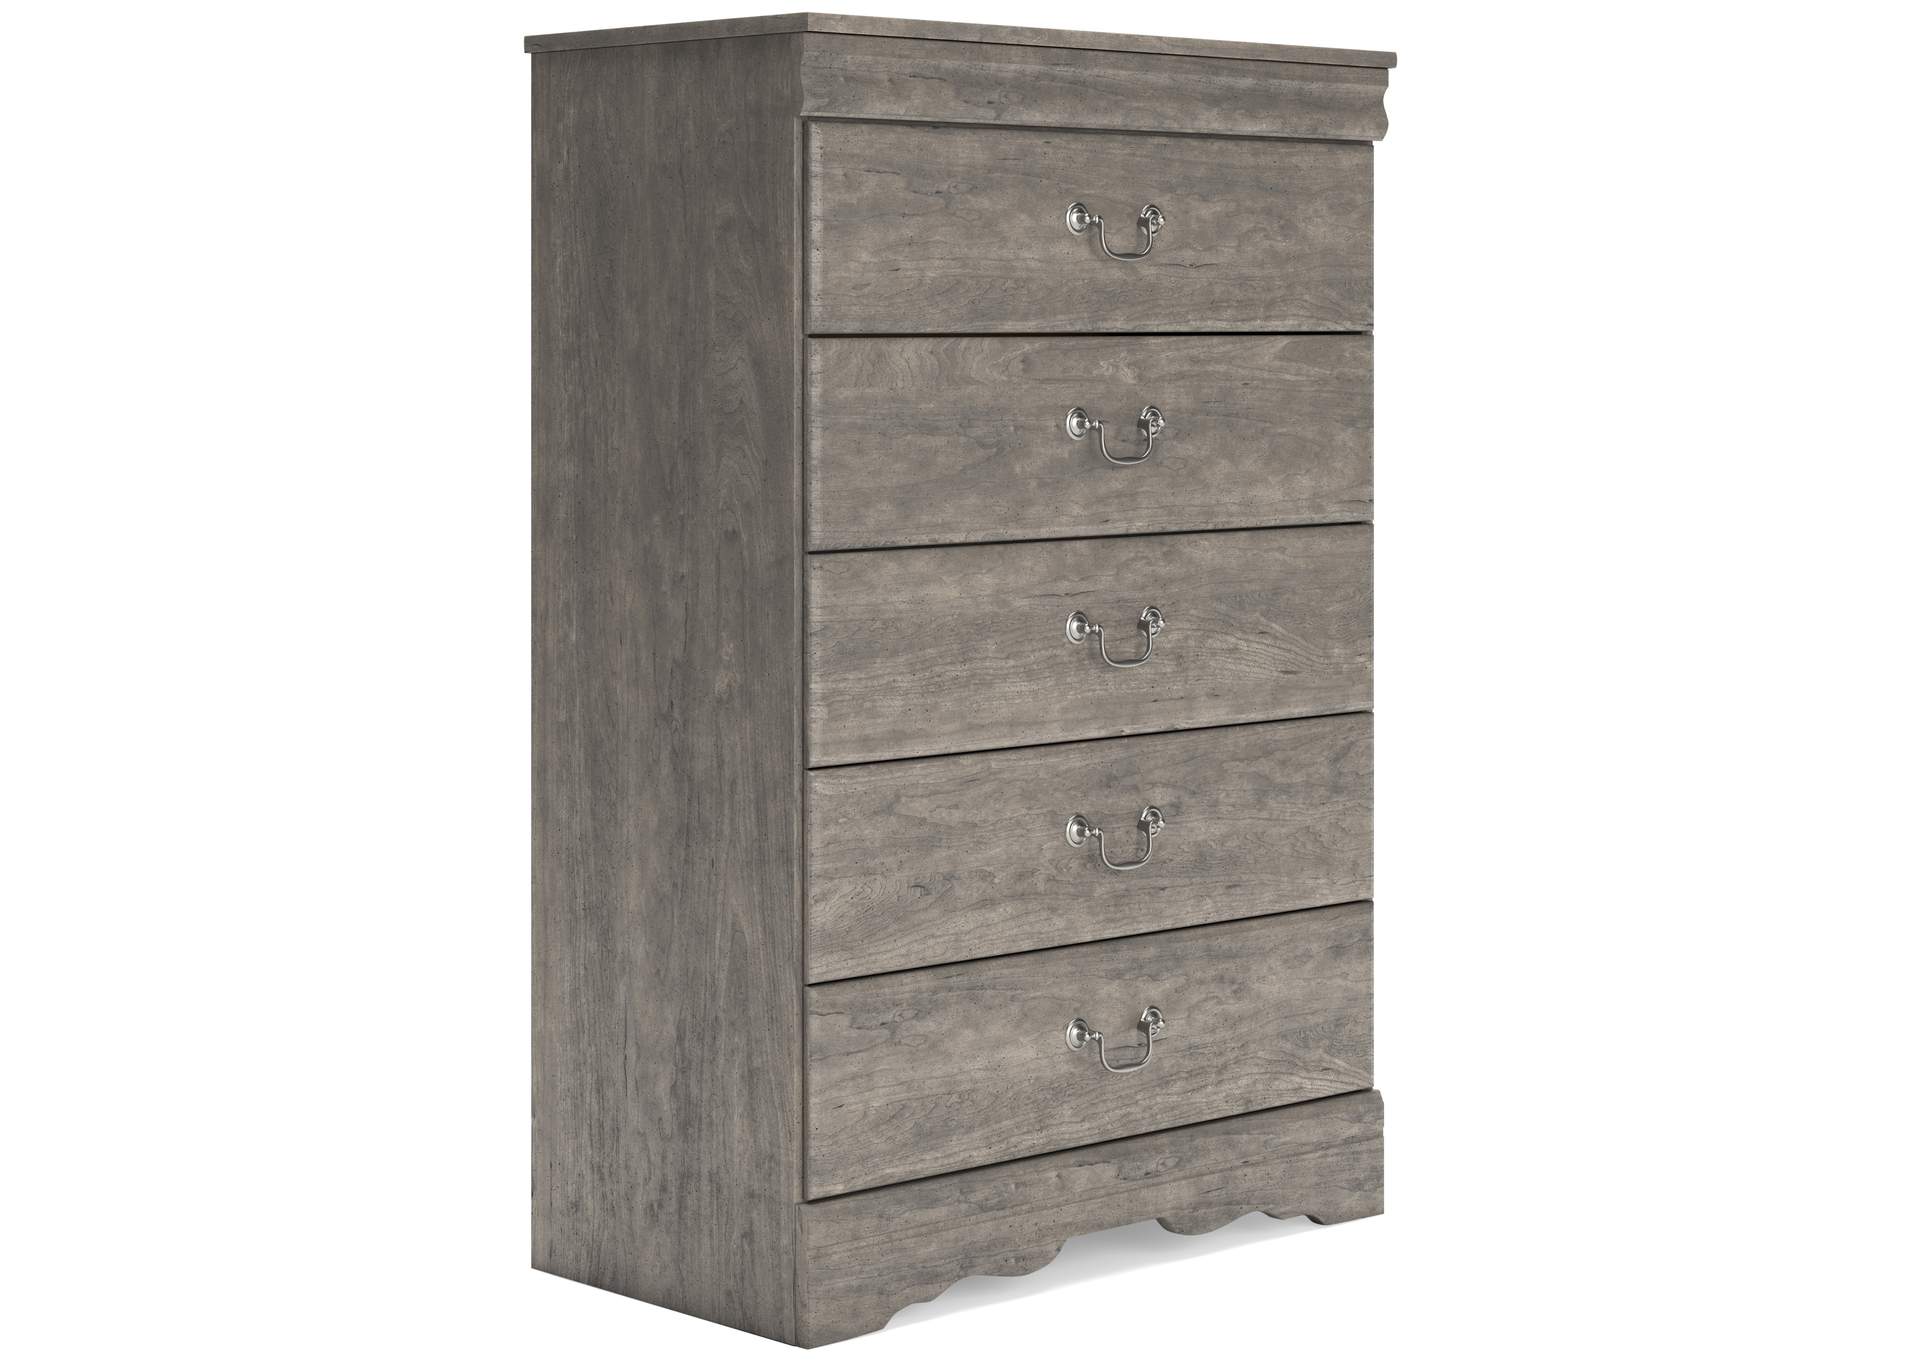 Bayzor Chest of Drawers,Signature Design By Ashley